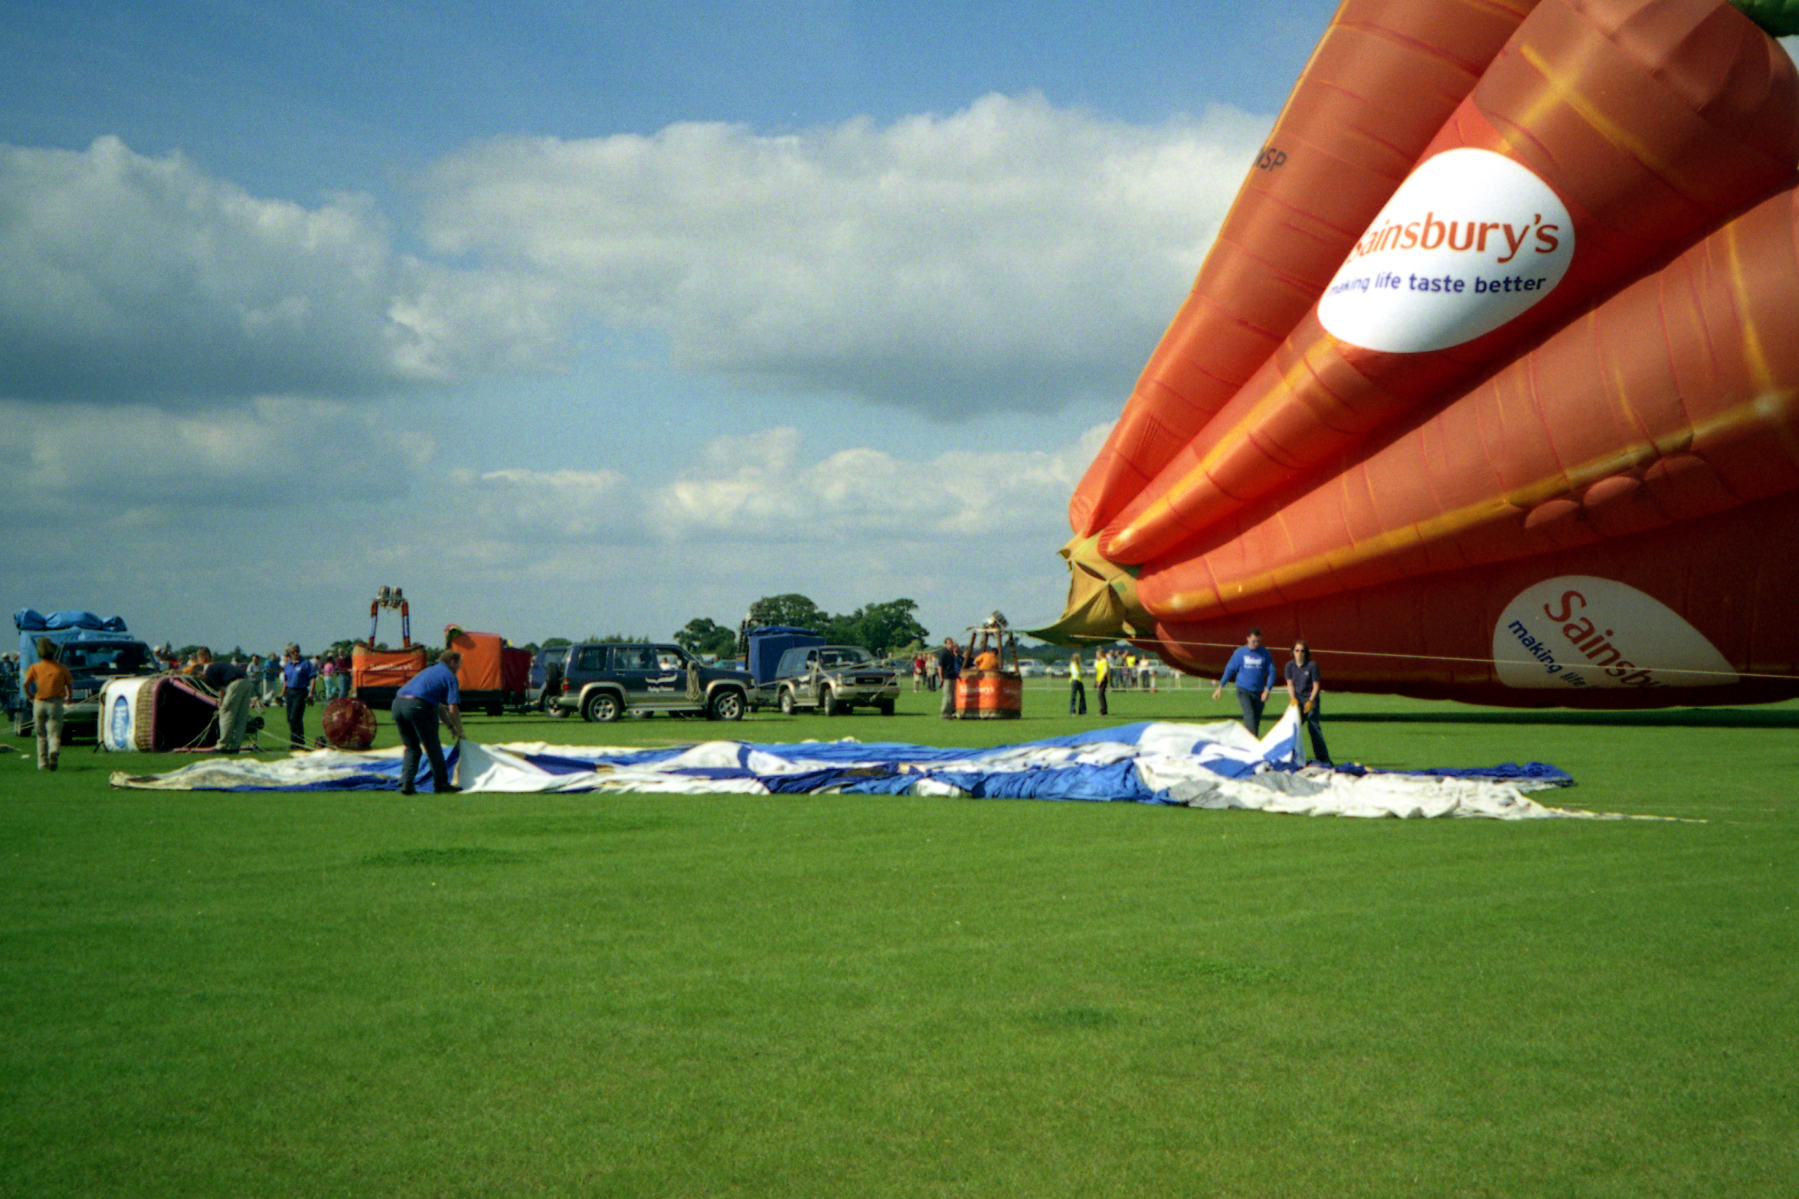 large balloons are being loaded for a festival